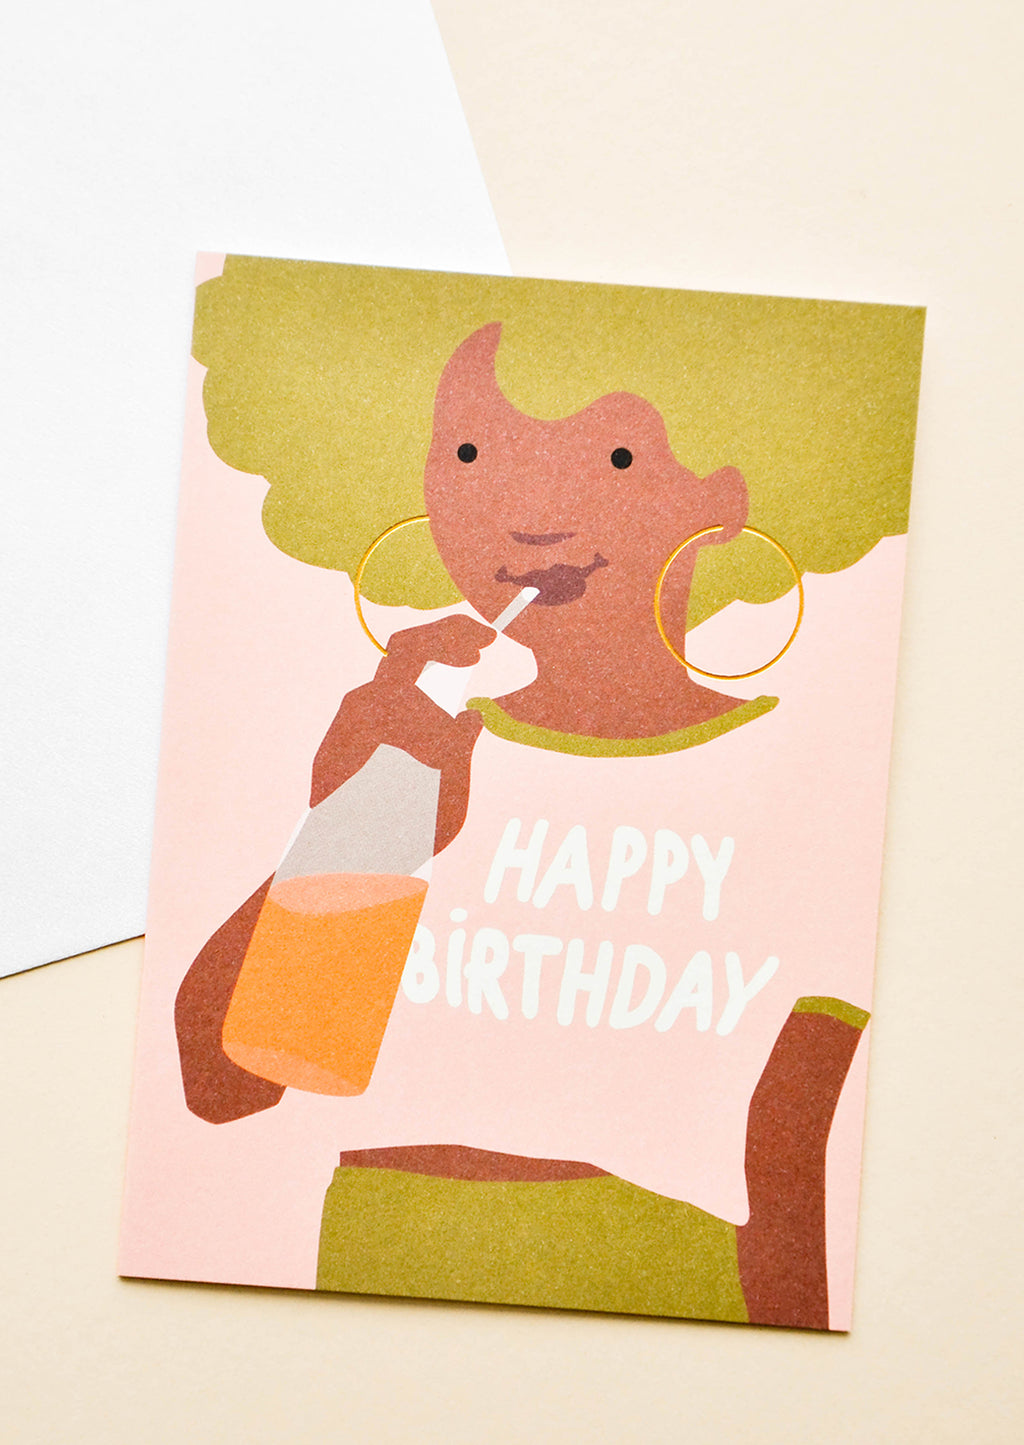 1: Greeting card with illustration of girl with green hair, drinking orange soda with "Happy Birthday" written on her pink t-shirt. Shown with white envelope.